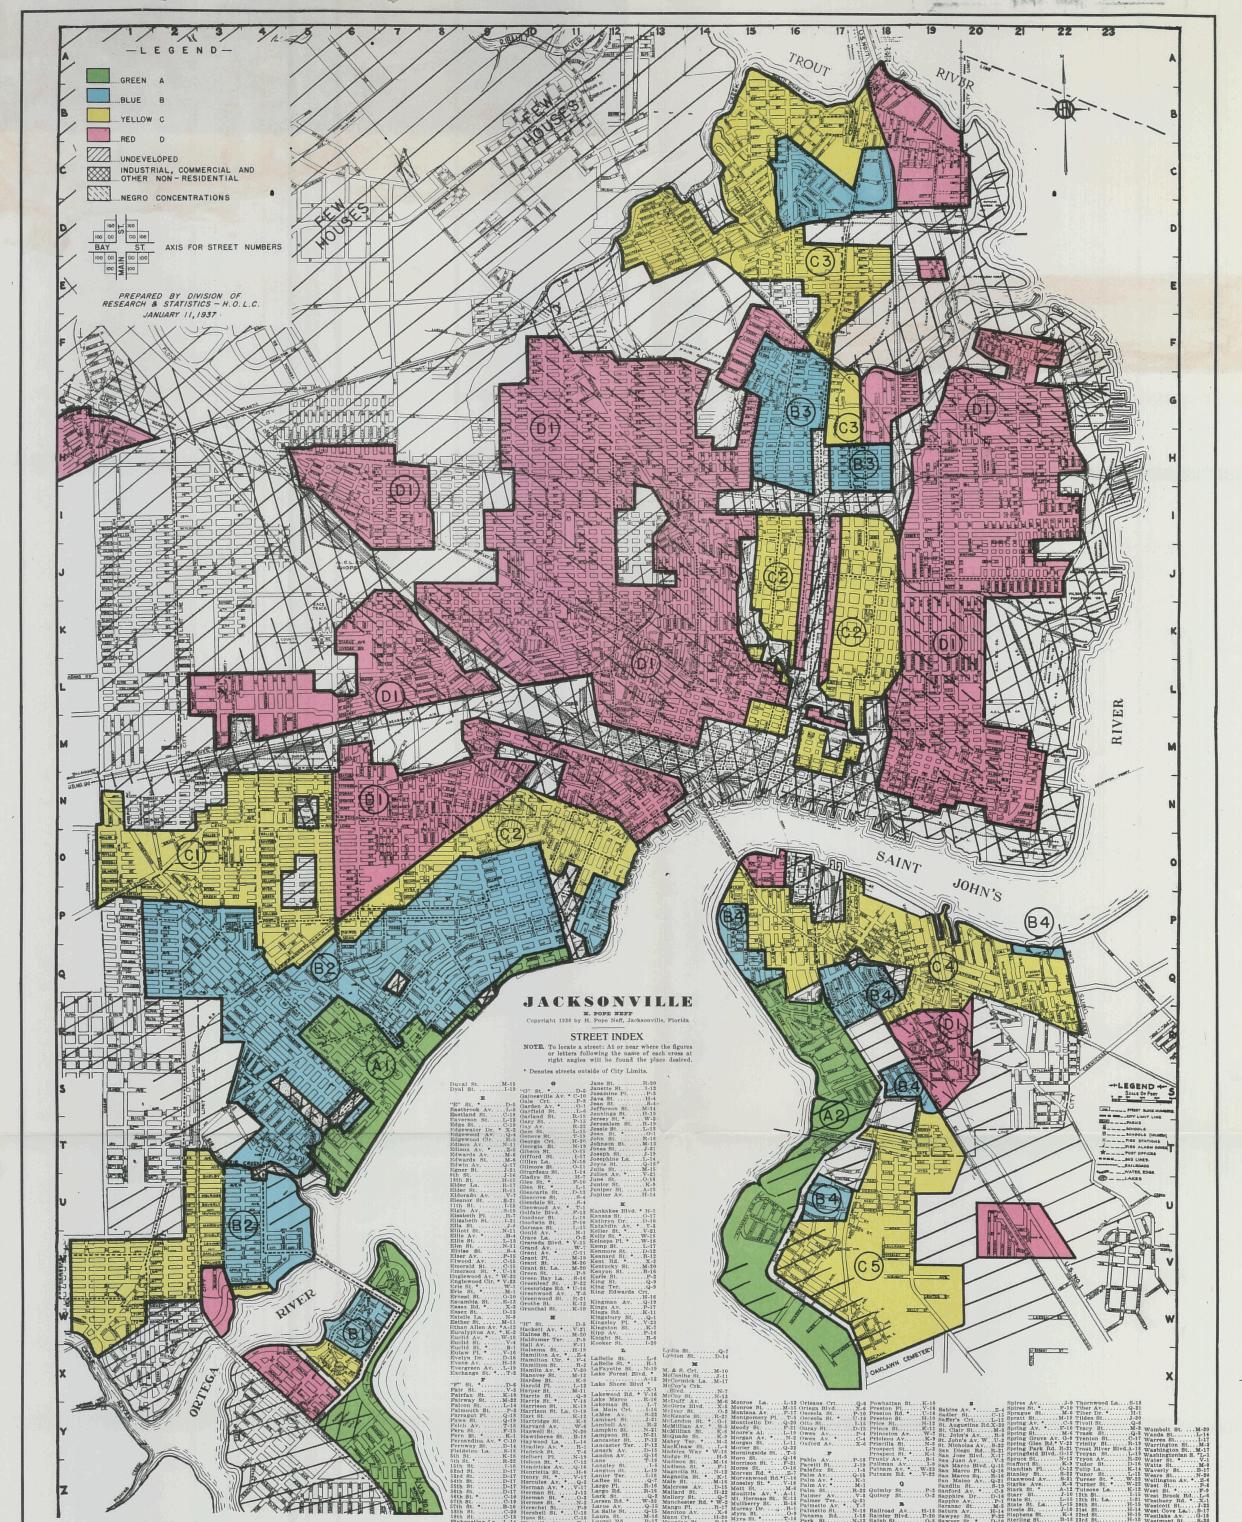 The key to this 1936 Residential Security Map of Jacksonville indicates areas of "negro concentration" that are clearly marked in red — a practice also known as "redlining."